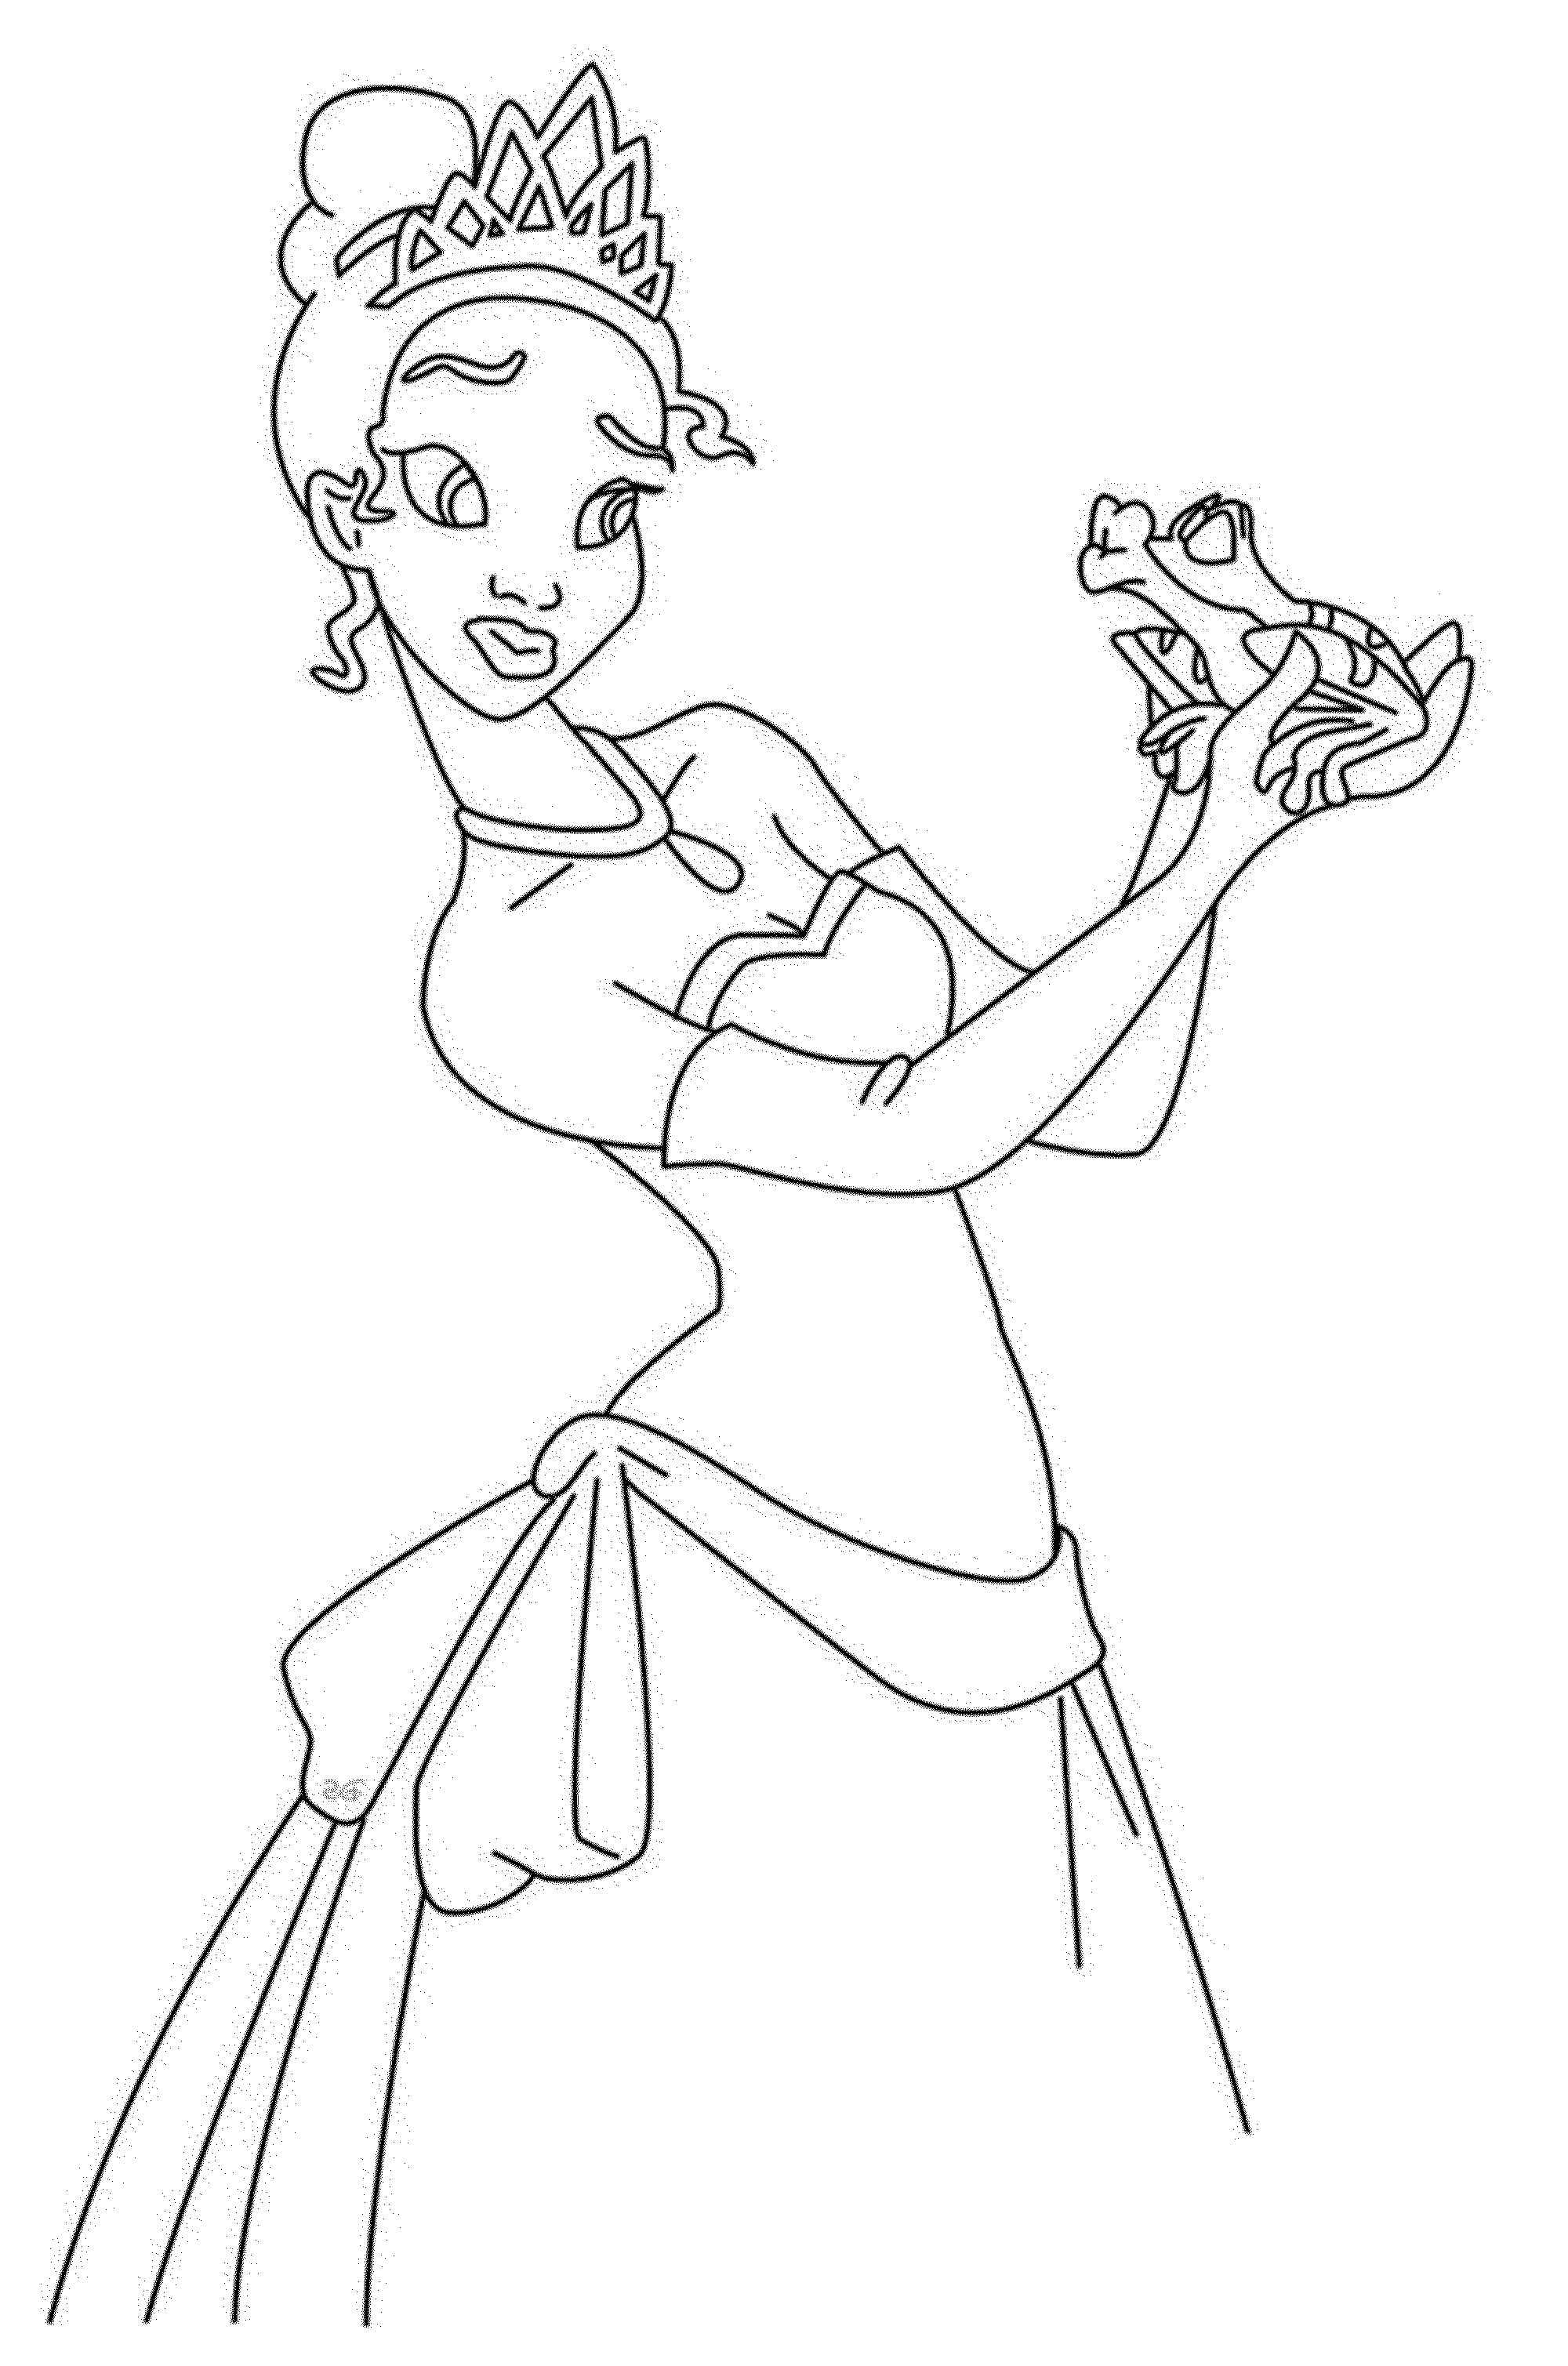 Coloring Pages Of Frog Princes - Coloring